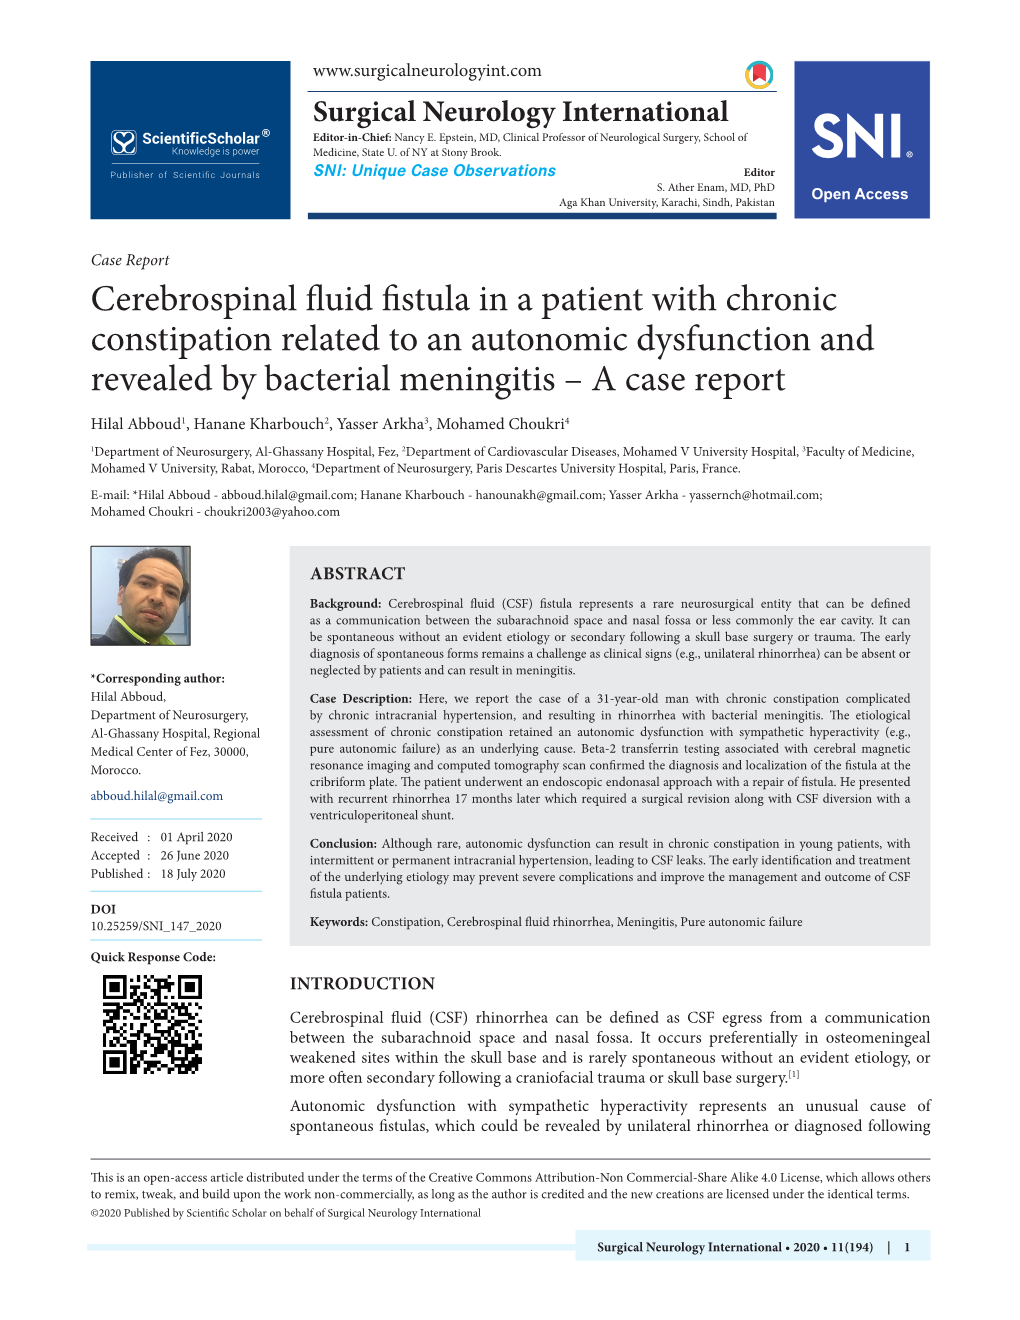 Cerebrospinal Fluid Fistula in a Patient with Chronic Constipation Related to an Autonomic Dysfunction and Revealed by Bacterial